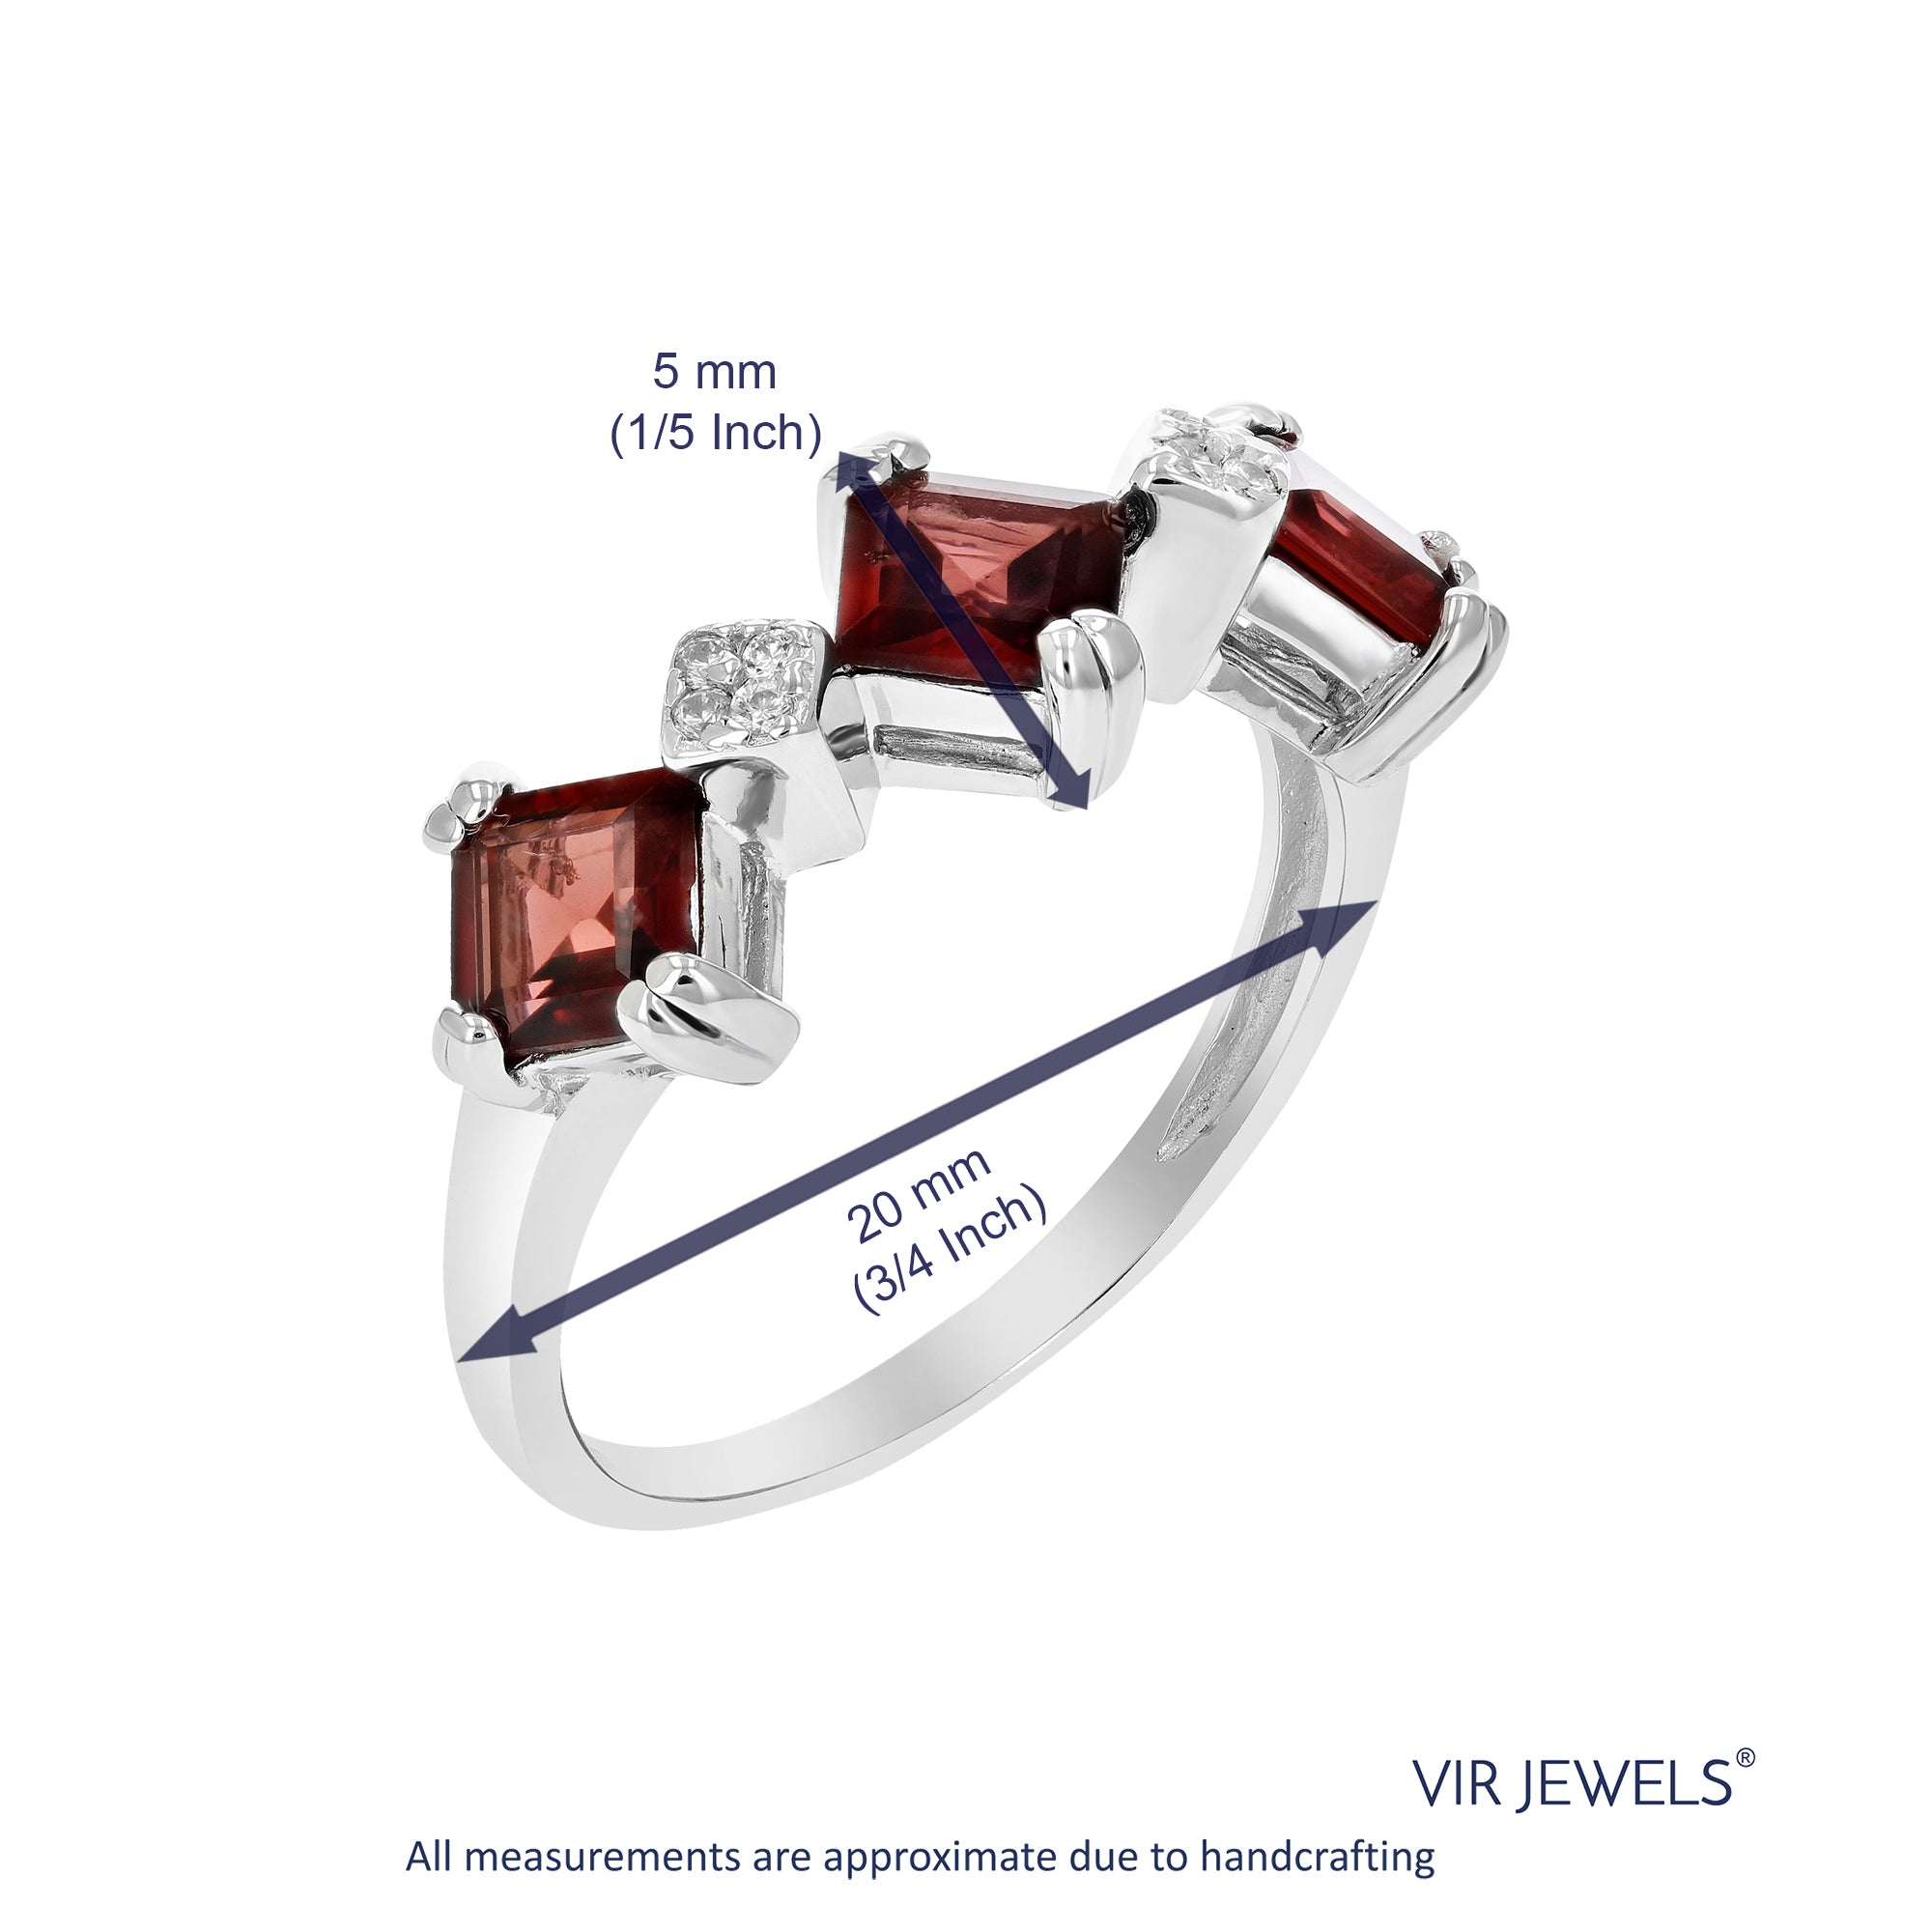 0.70 cttw 3 Stone Garnet Ring .925 Sterling Silver with Rhodium Plating Princess